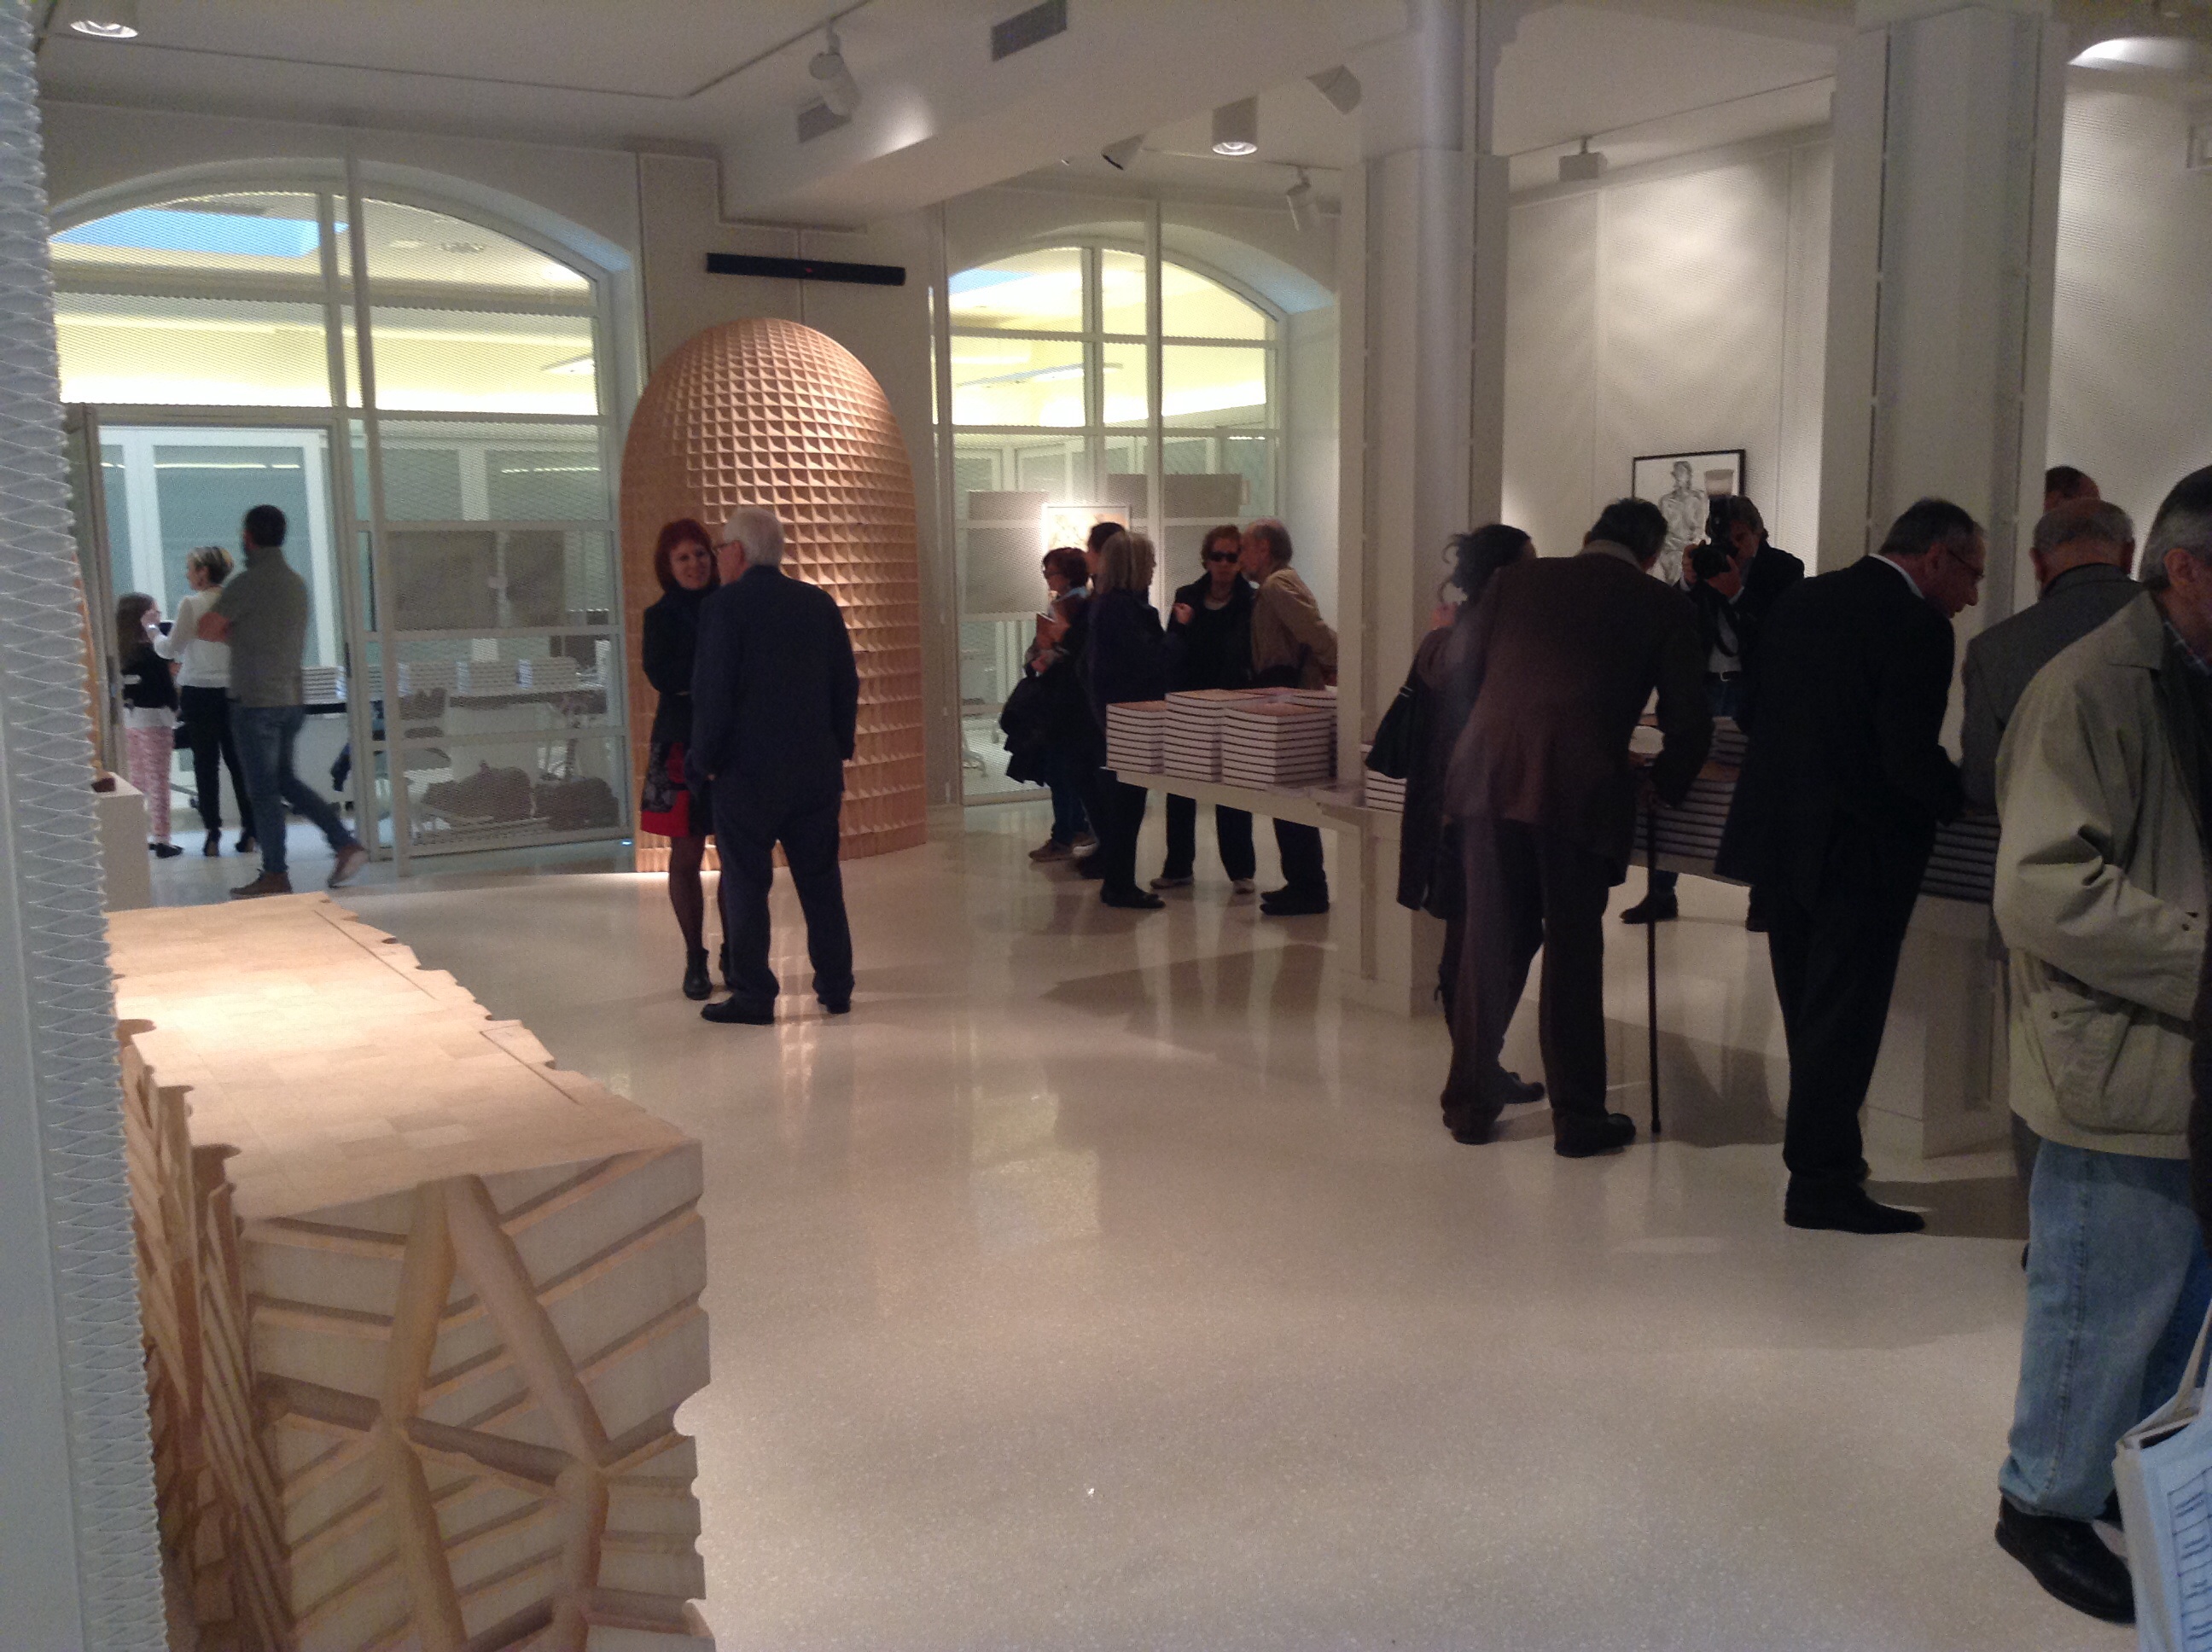 Great turnout at the Giuseppe Rivadossi’s exhibition